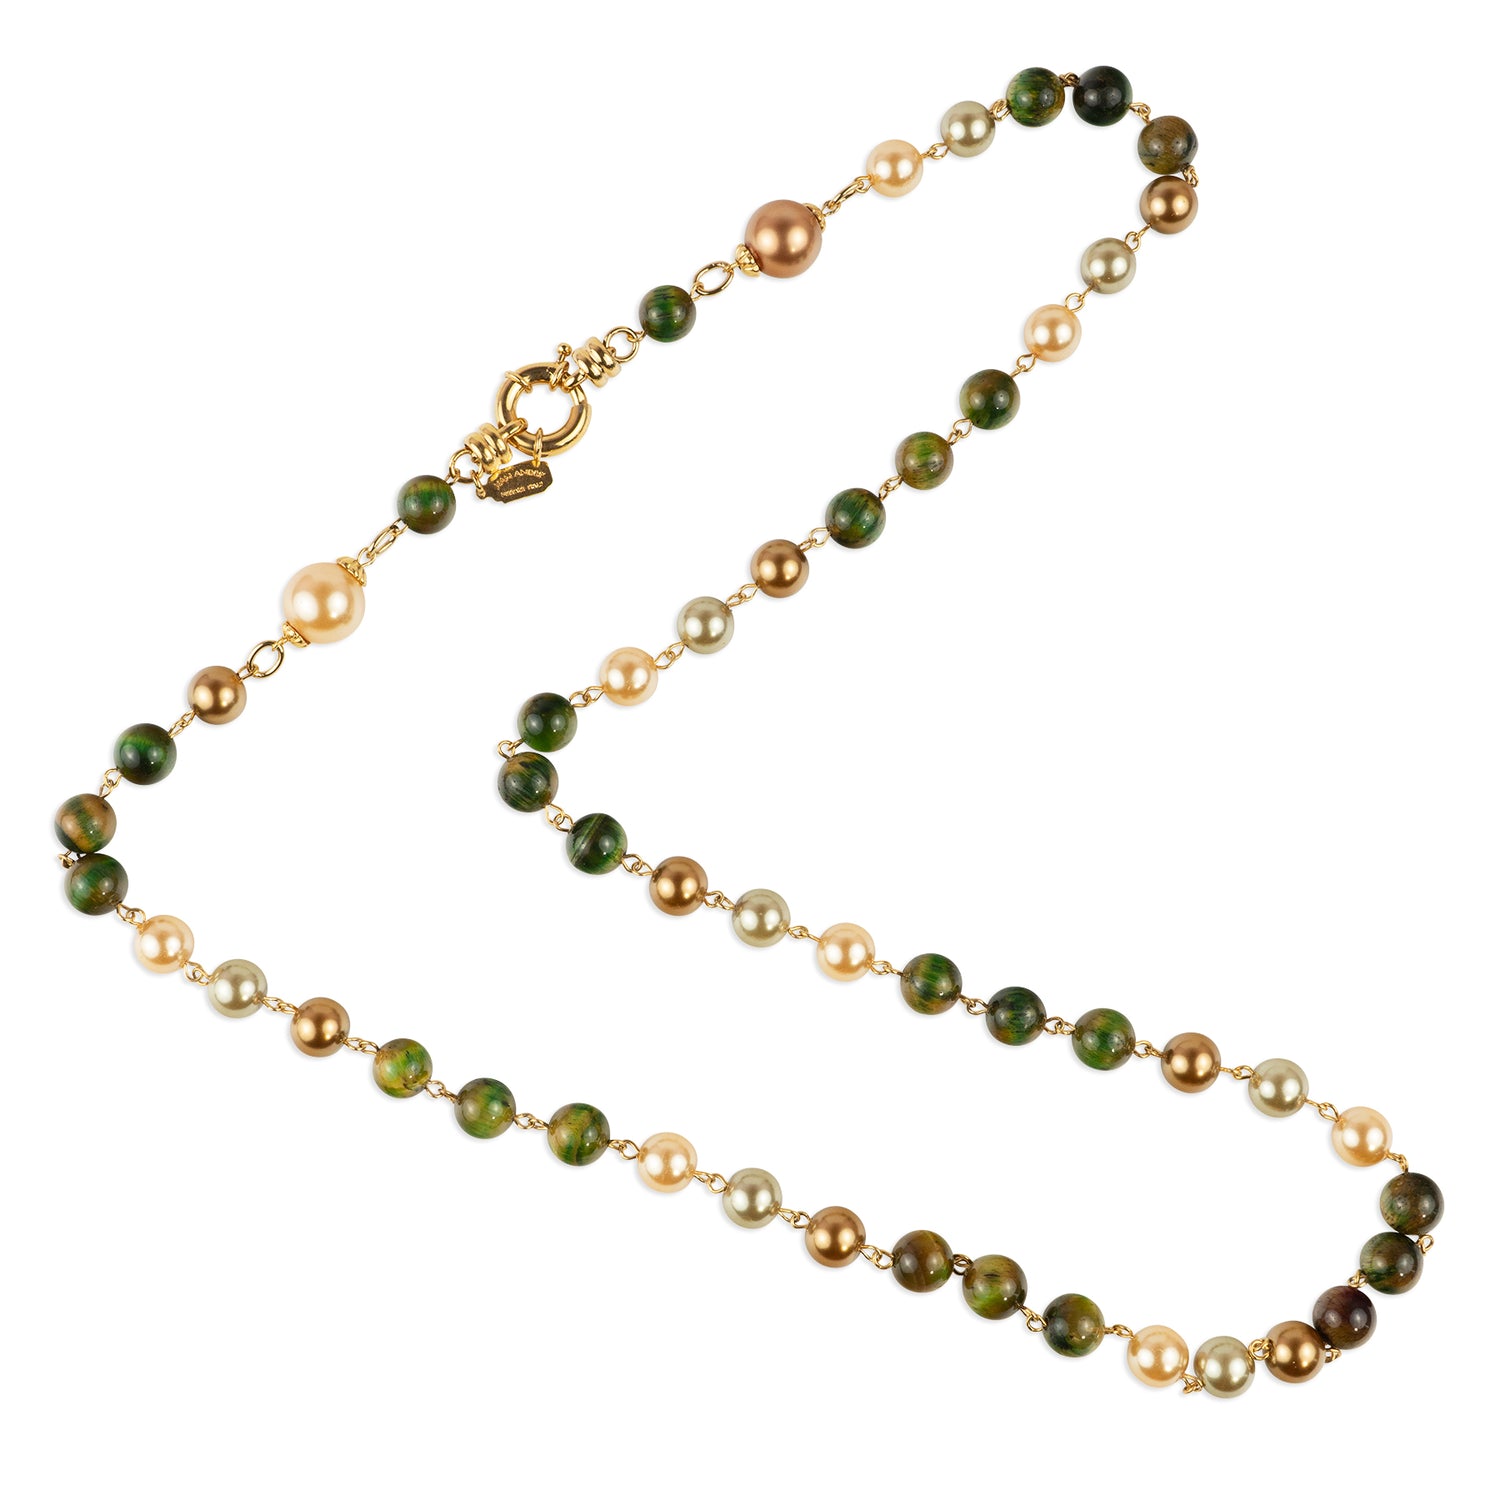 Necklace with snap clasp in semi-precious stones and pearls